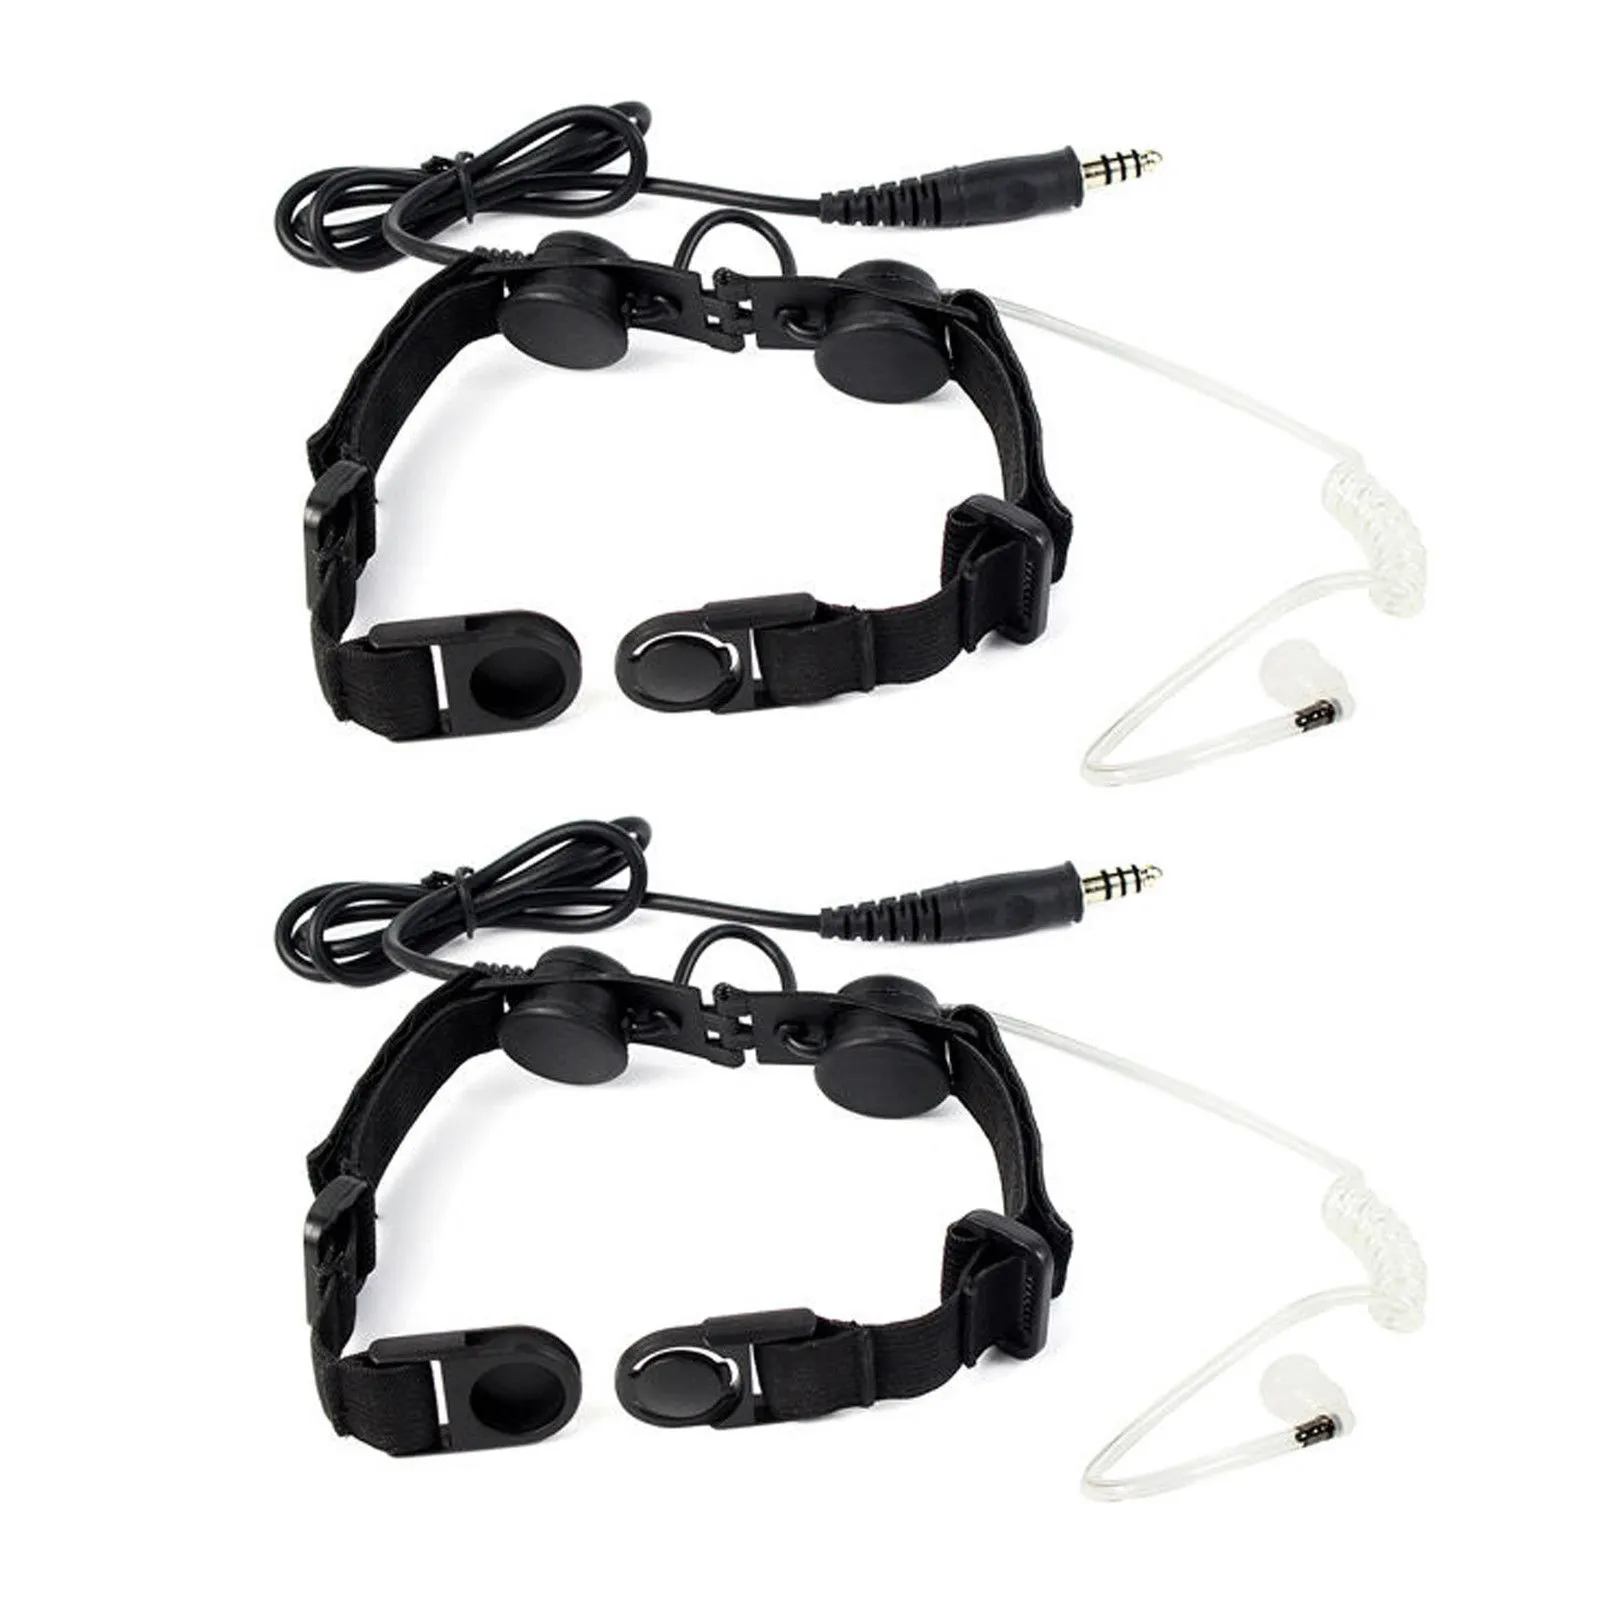 New 2PCS Tactical Throat Mic Air Acoustic Tube Earpiece Headsets for Radios CS